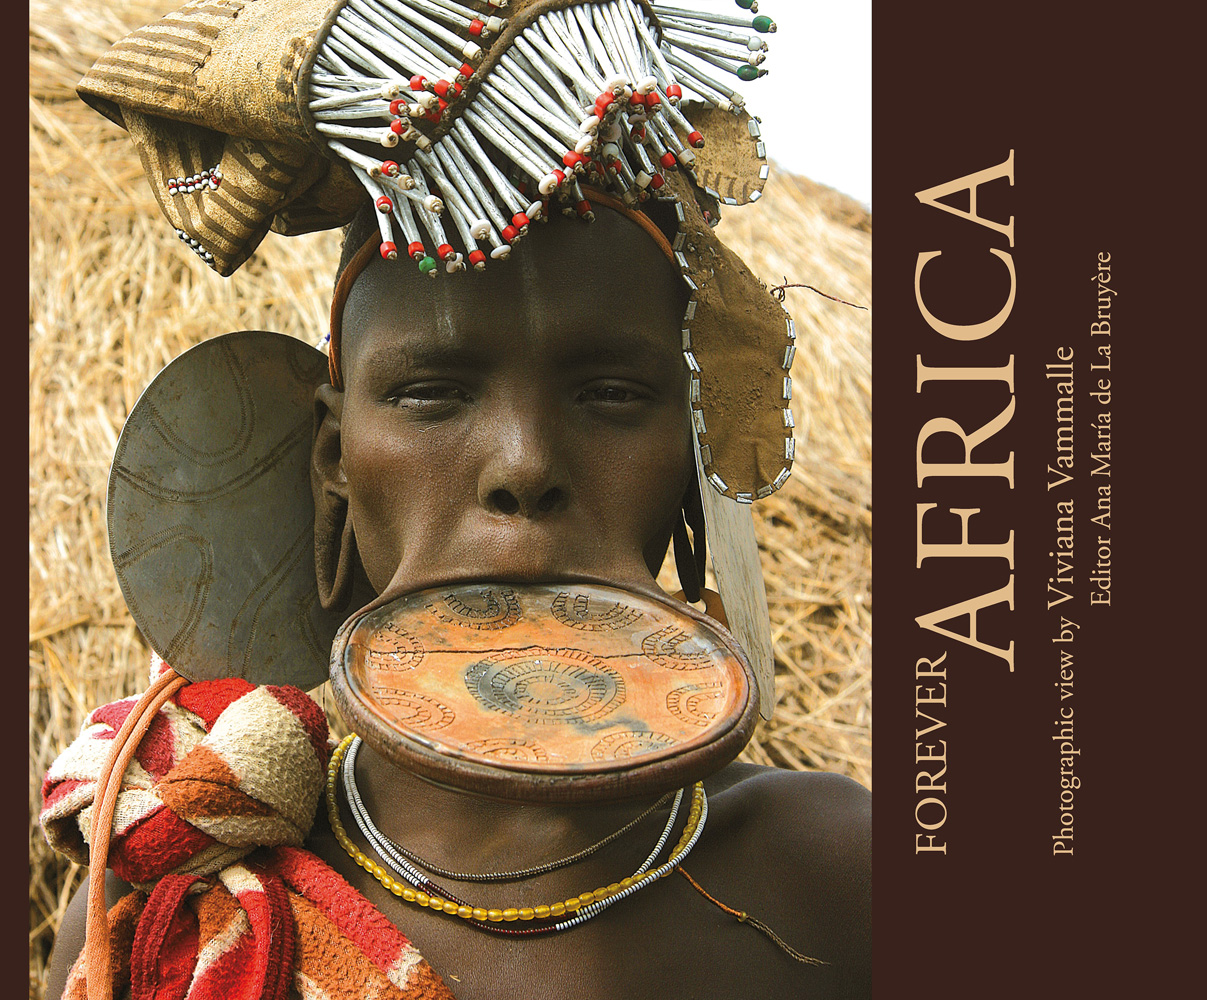 Black tribe member with large lip plate on cover of 'Forever Africa', by Ediciones El Viso.